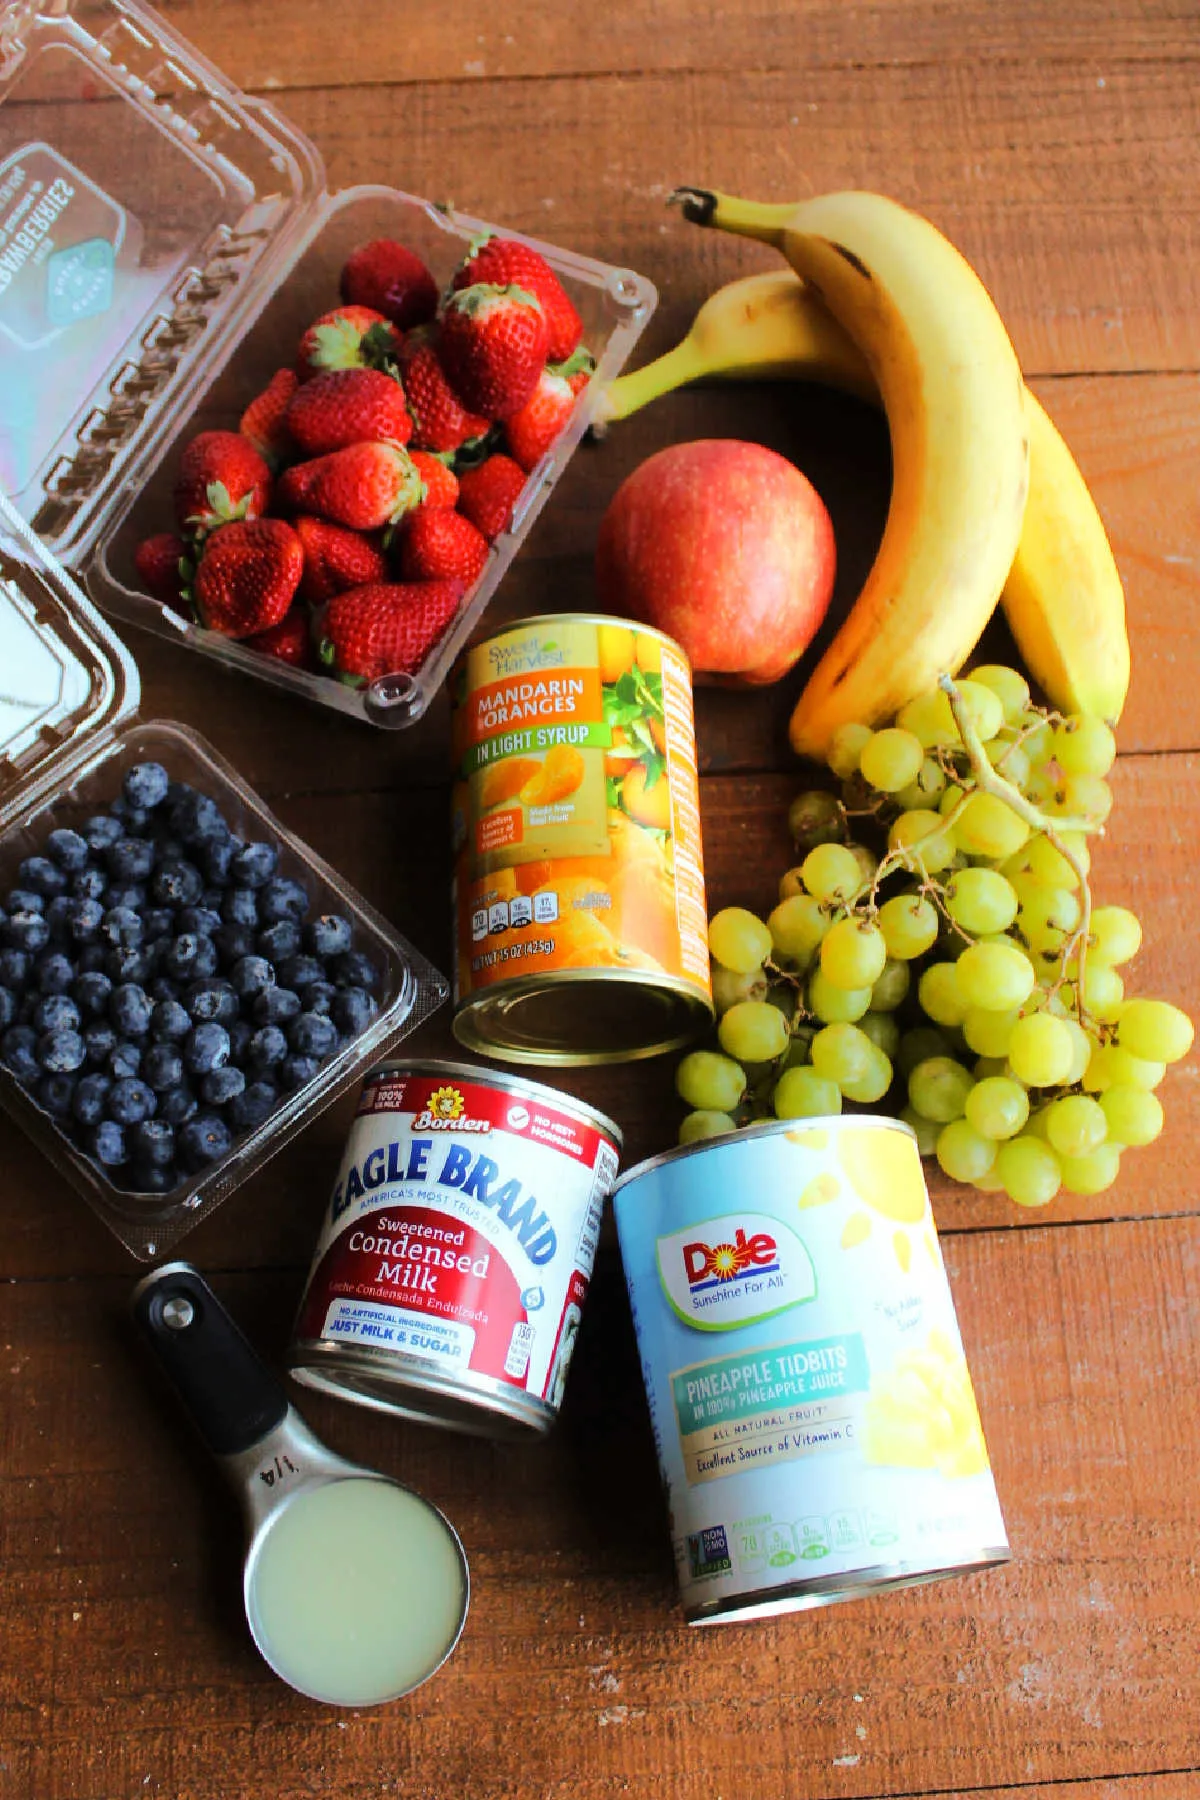 Ingredients including fresh bananas, strawberries, blueberries, grapes, apple and canned oranges, pineapple, condensed milk and lemon juice ready to be made into condensed milk fruit salad.